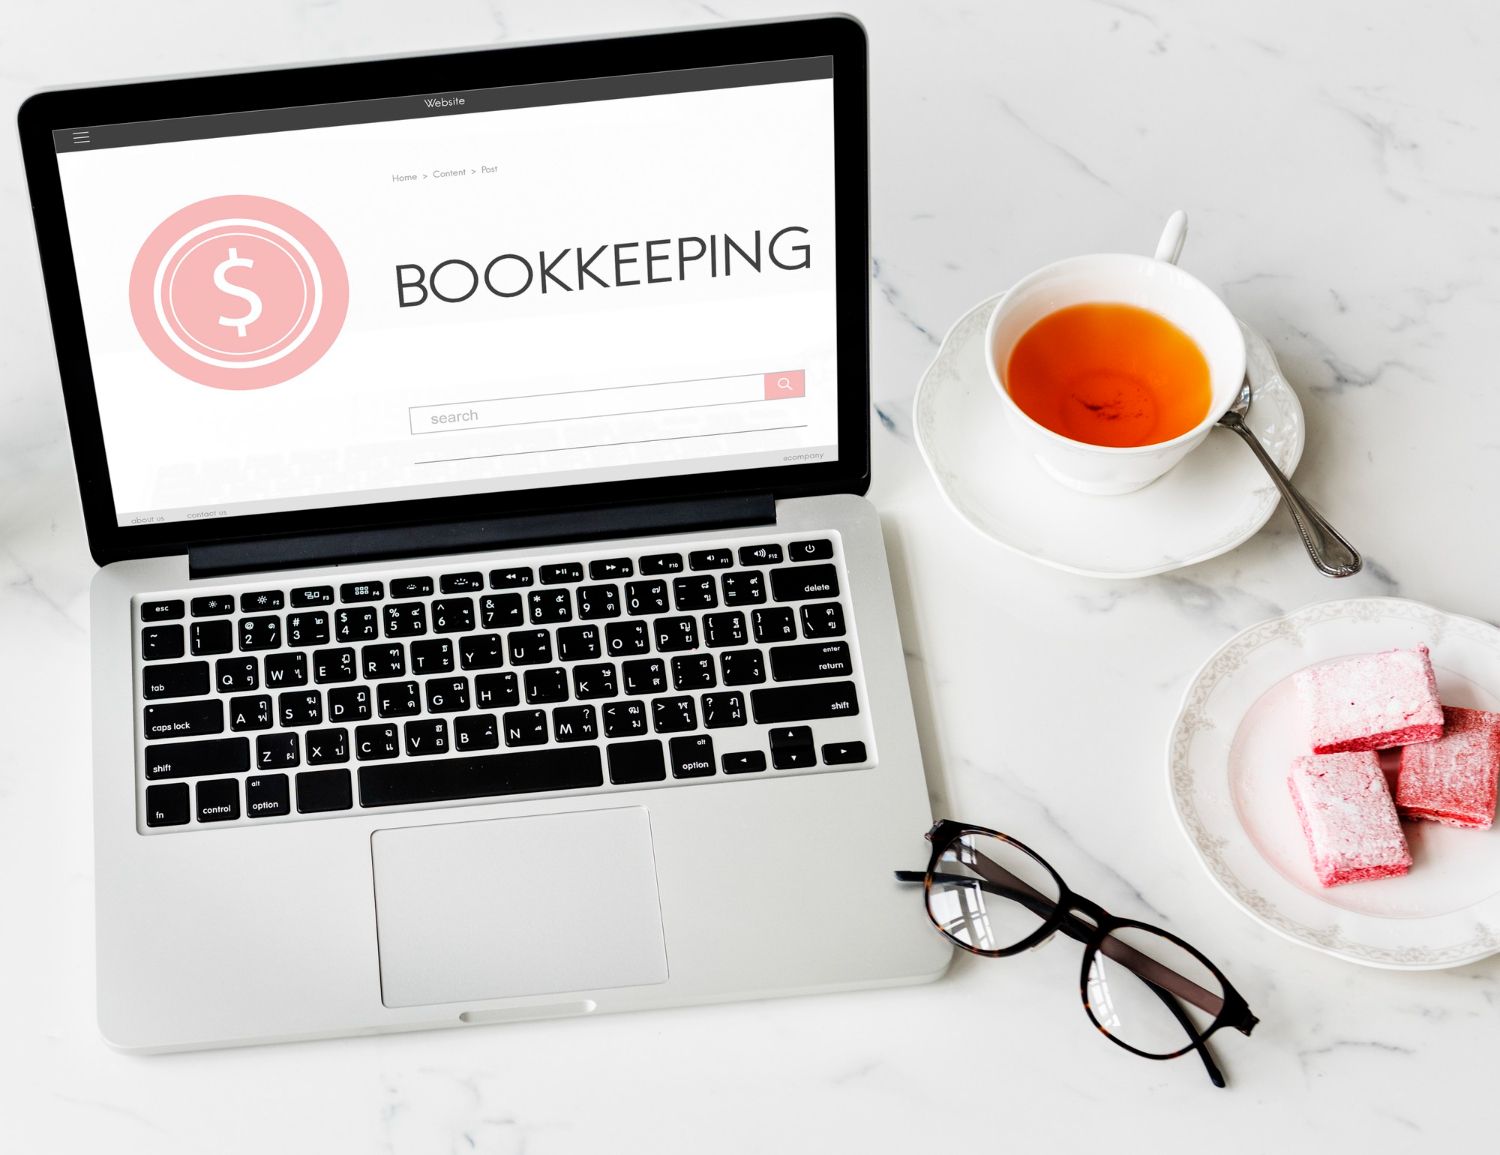 The Ultimate Guide To Virtual Bookkeeping For Business – Things You Need To Know Before Hiring A Virtual Bookkeeper